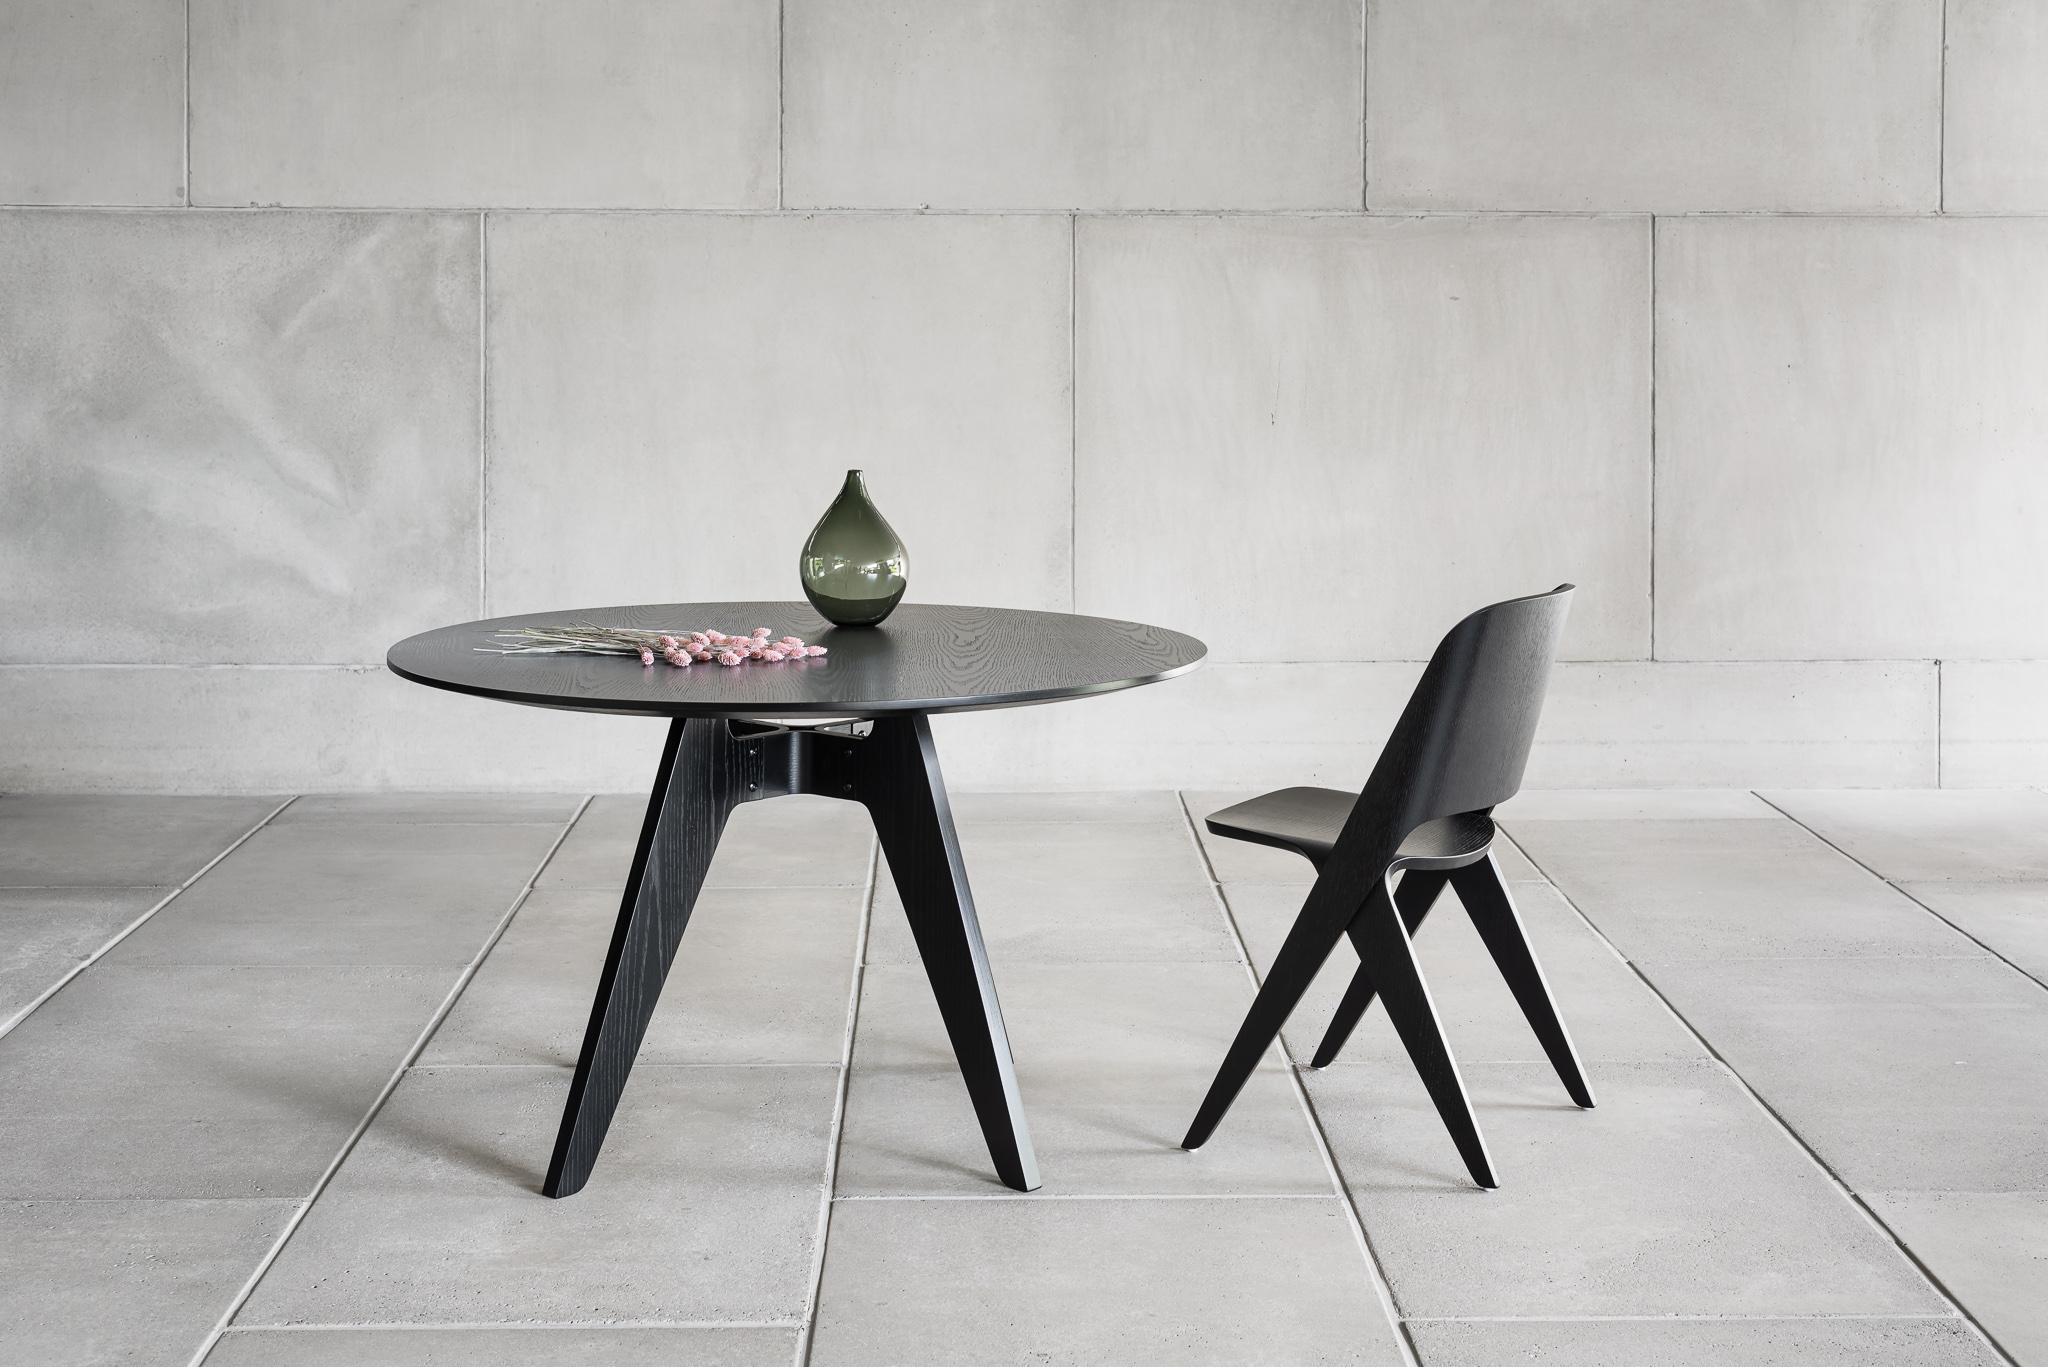 Lavitta chair by Poiat 
Designers: Timo Mikkonen & Antti Rouhunkoski
Collection Lavitta 2014

Model shown: wood stain - black oak 
Dimensions: D. 52 x W. 53 x H. 81 

The Lavitta Chair is a modern classic that focuses on the sophisticated